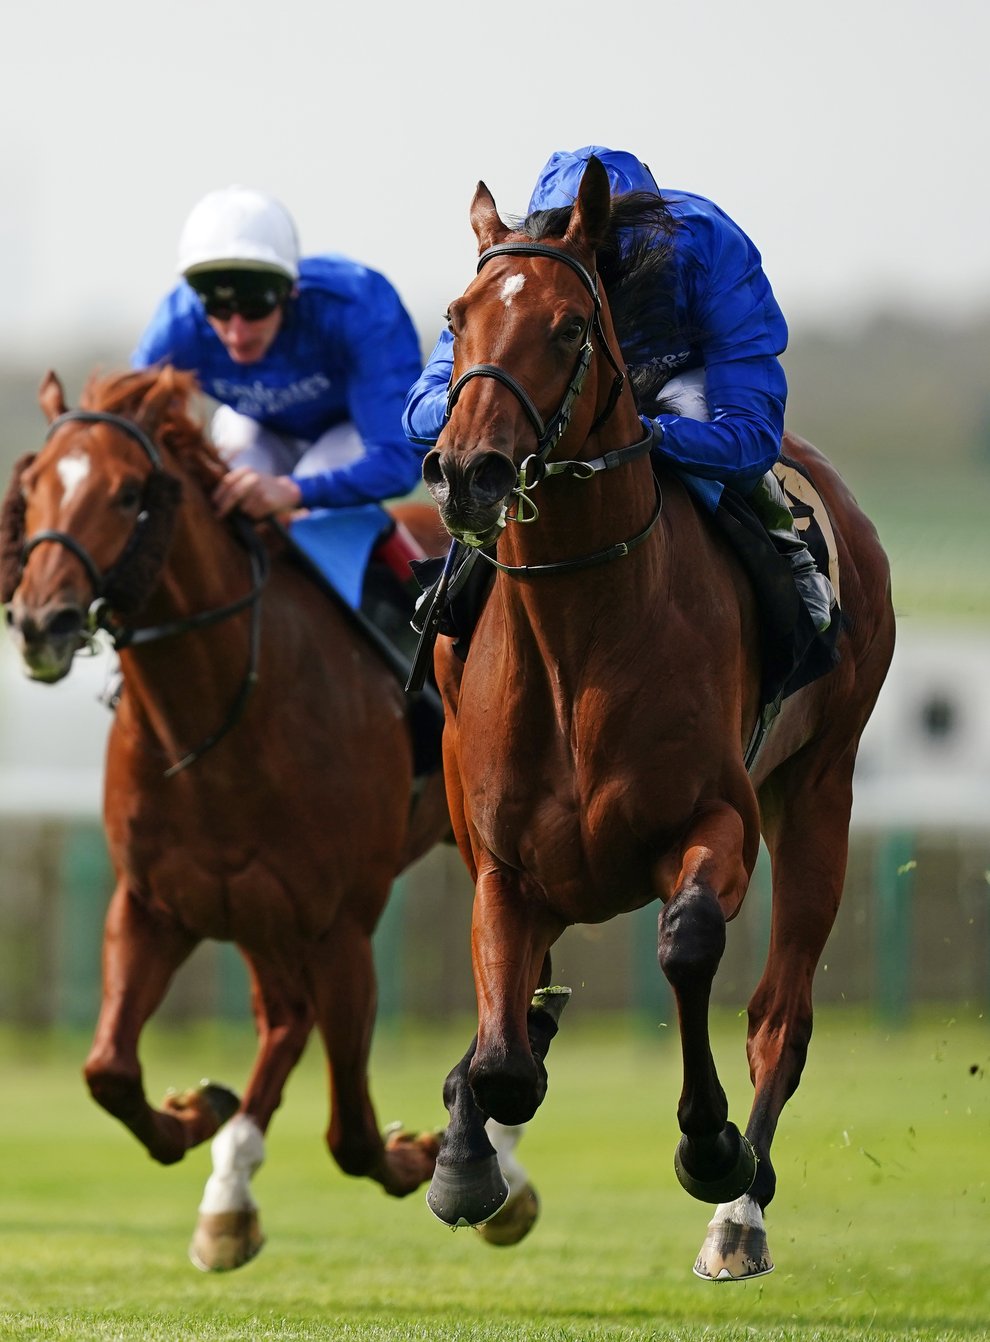 Bold Act ridden by William Buick (right) wins the Federation Of Bloodstock Agents Nursery during day one of the Cambridgeshire Meeting at Newmarket Racecourse (Mike Egerton/PA)